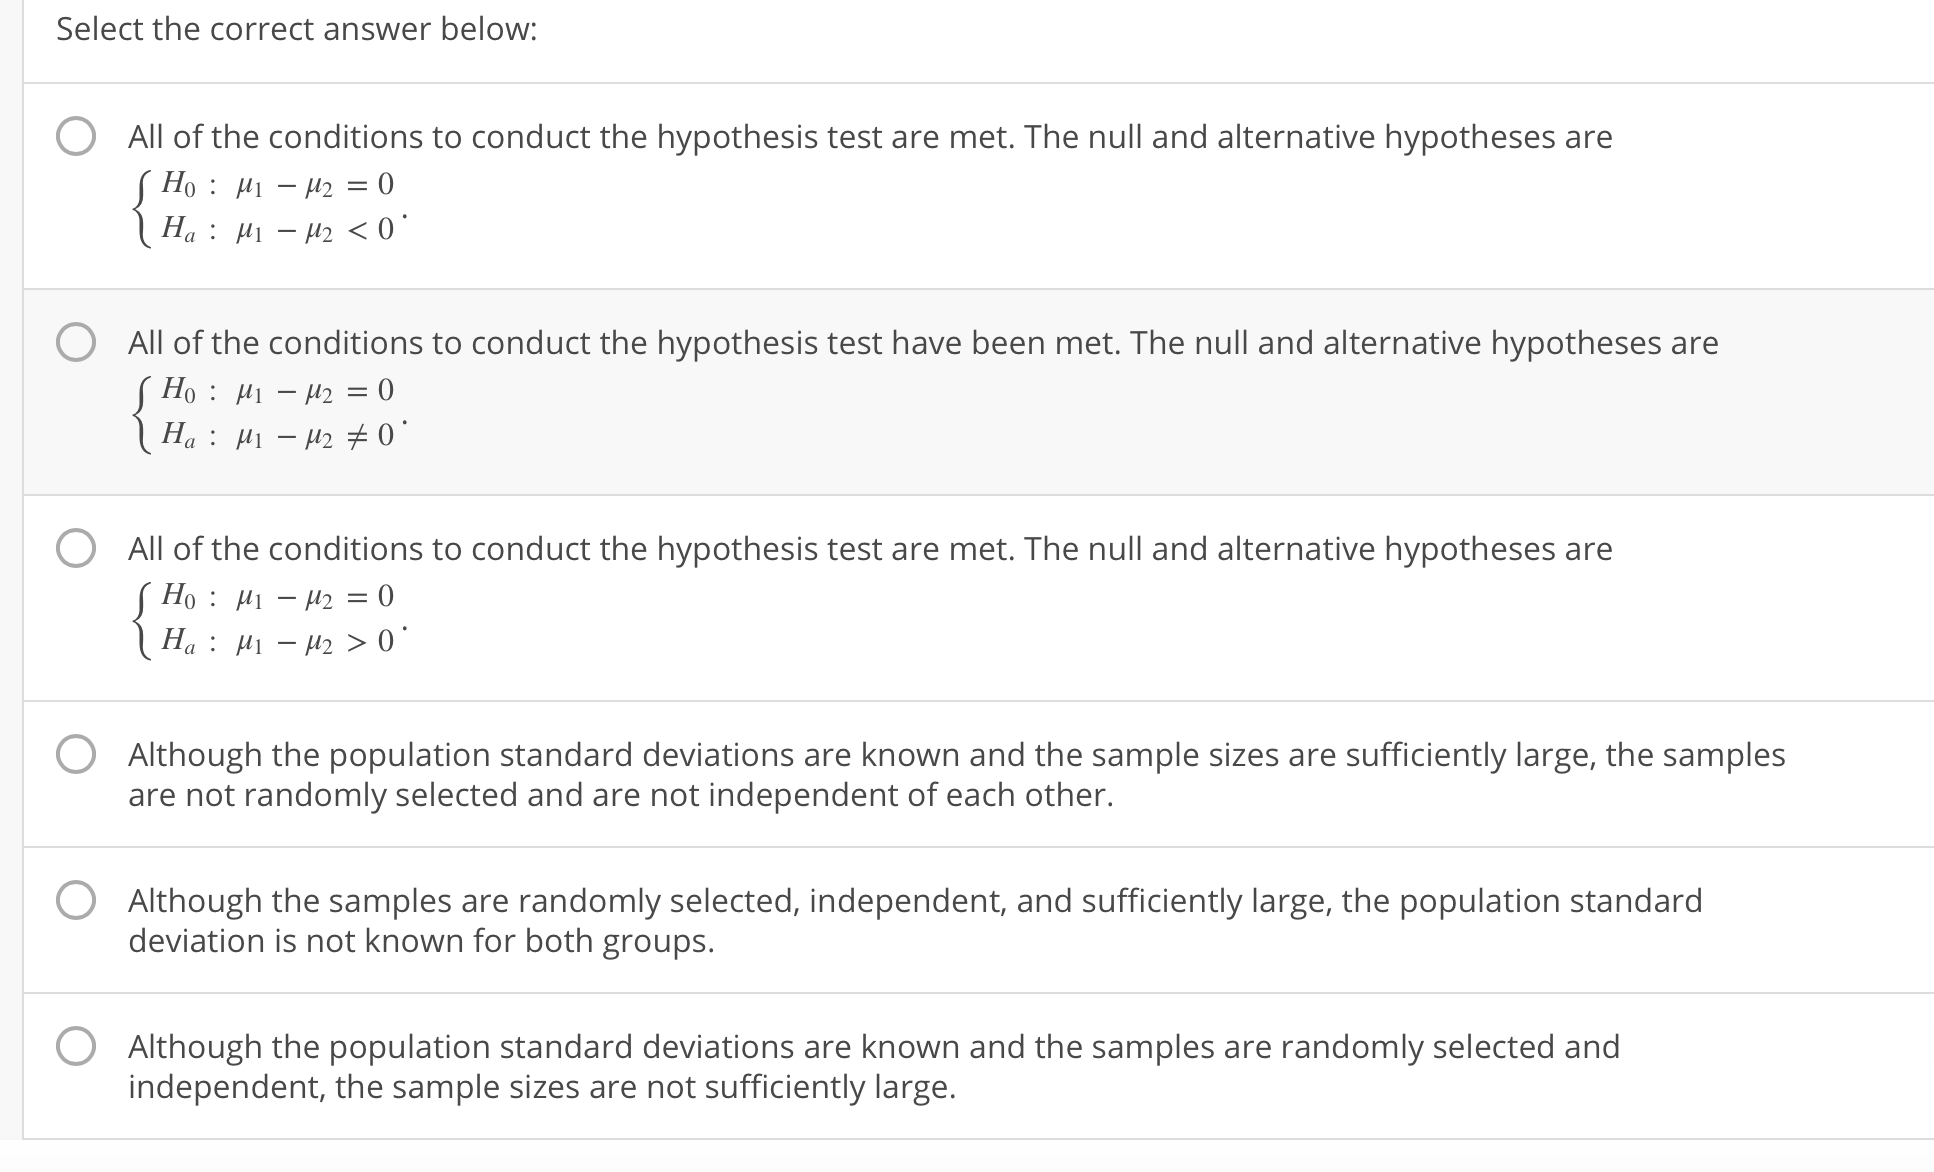 Select the correct answer below
O All of the conditions to conduct the hypothesis test are met. The null and alternative hypotheses are
O
All of the conditions to conduct the hypothesis test have been met. The null and alternative hypotheses are
All of the conditions to conduct the hypothesis test are met. The null and alternative hypotheses are
O
O
O
Although the population standard deviations are known and the sample sizes are sufficiently large, the samples
are not randomly selected and are not independent of each other.
Although the samples are randomly selected, independent, and sufficiently large, the population standard
deviation is not known for both groups.
Although the population standard deviations are known and the samples are randomly selected and
independent, the sample sizes are not sufficiently large.
